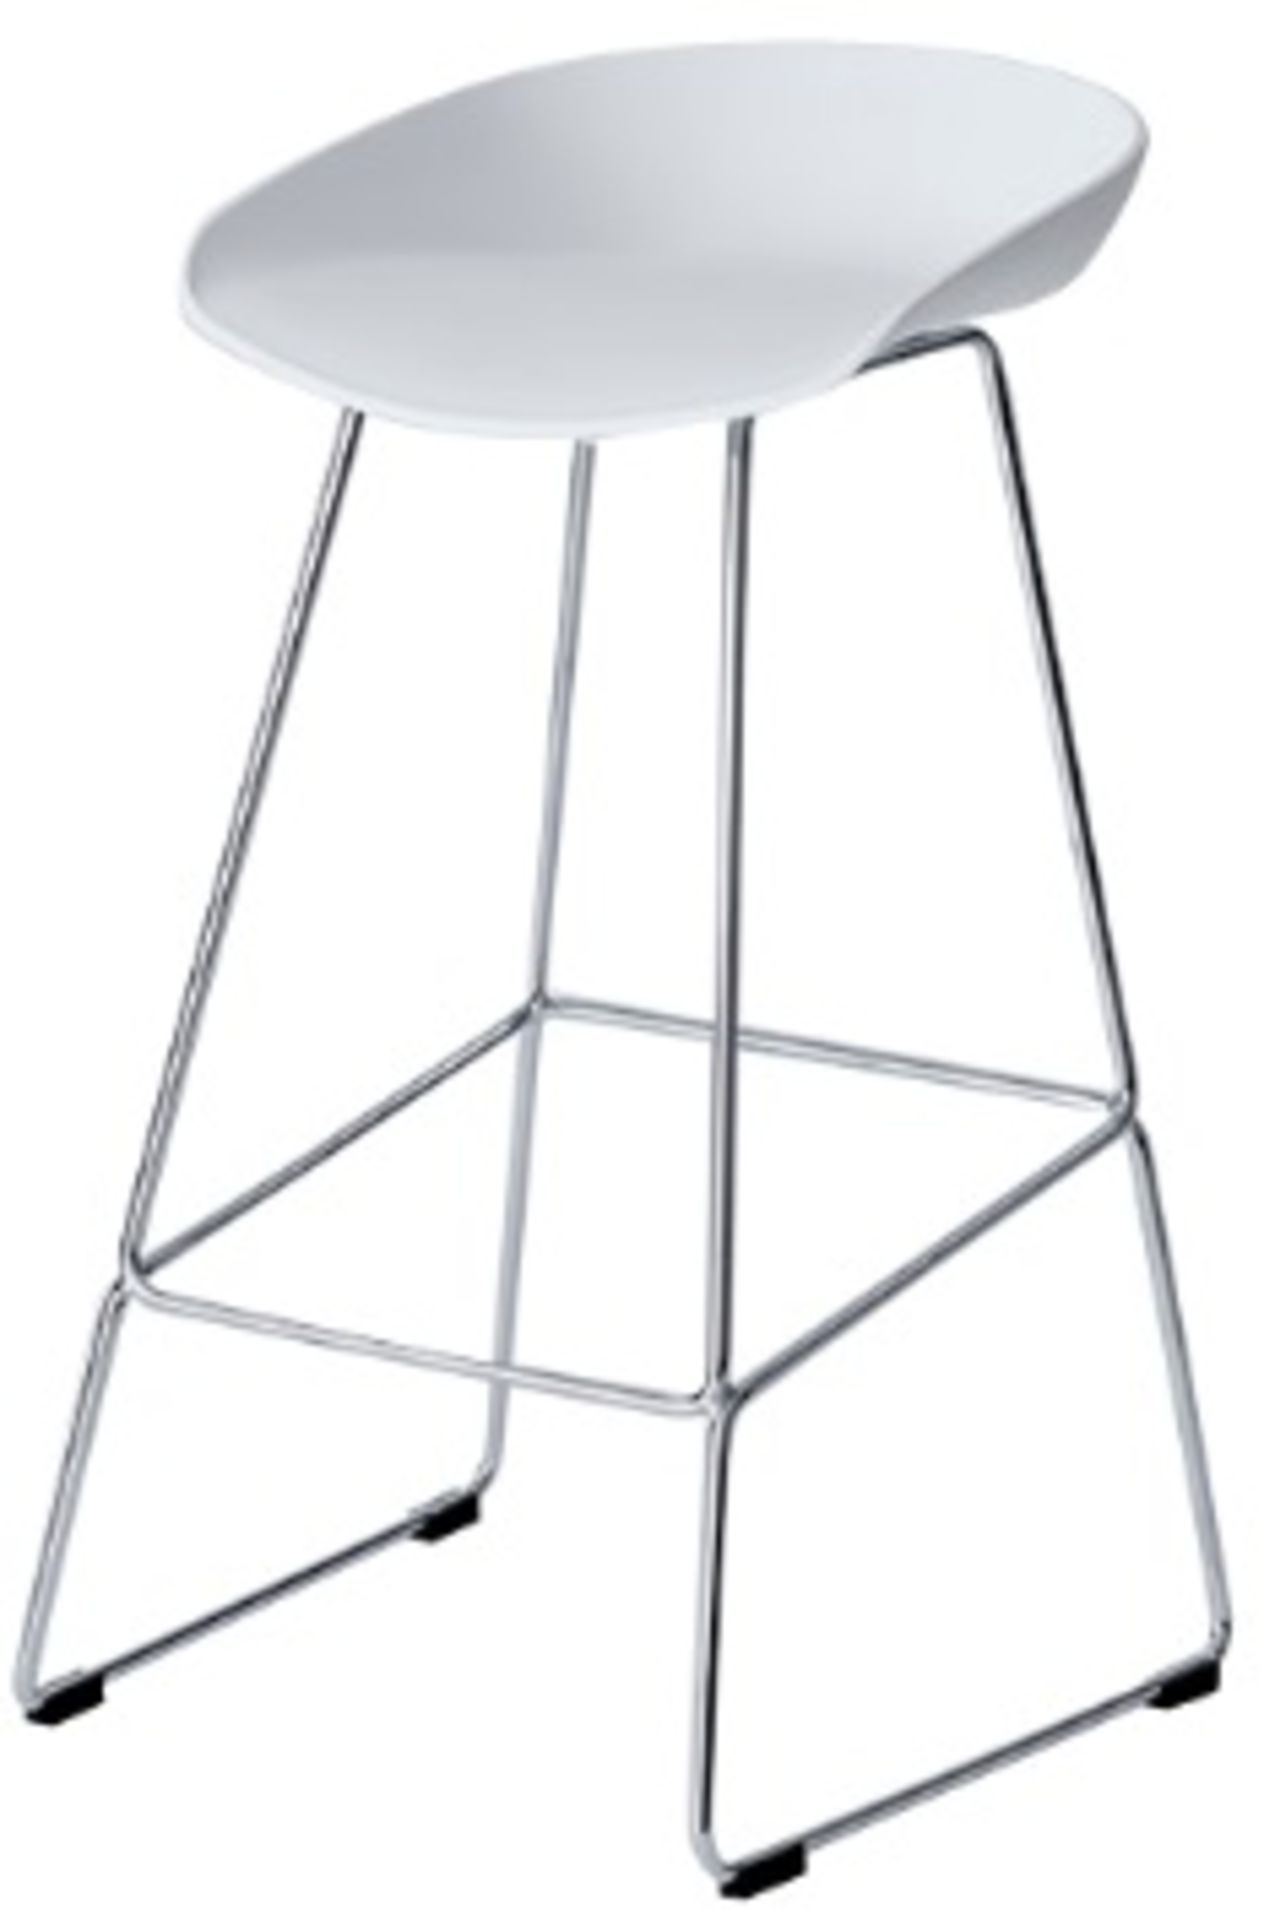 4 x OSLO Contemporary Bar Stools With White Moulded Seat And Metal Base - Brand New / Unboxed -